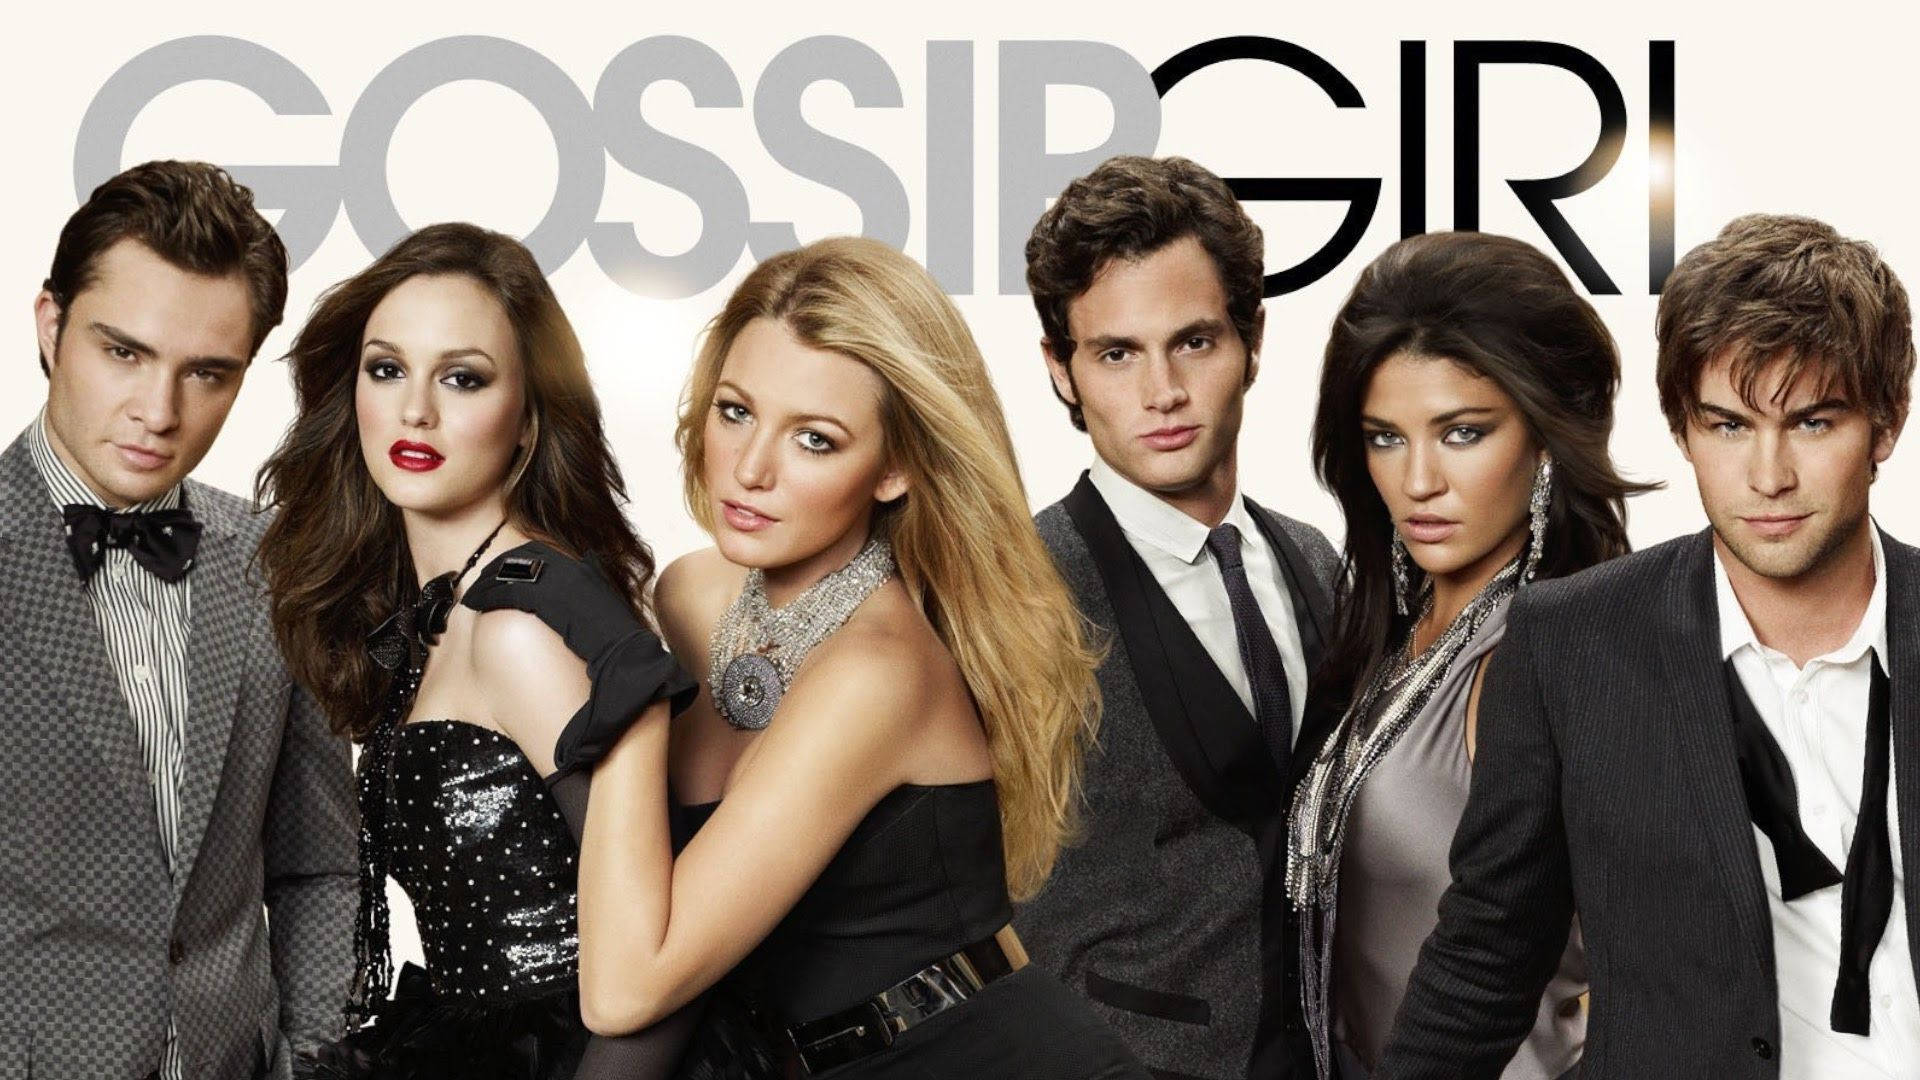 Gossip Girl Television Series Cover